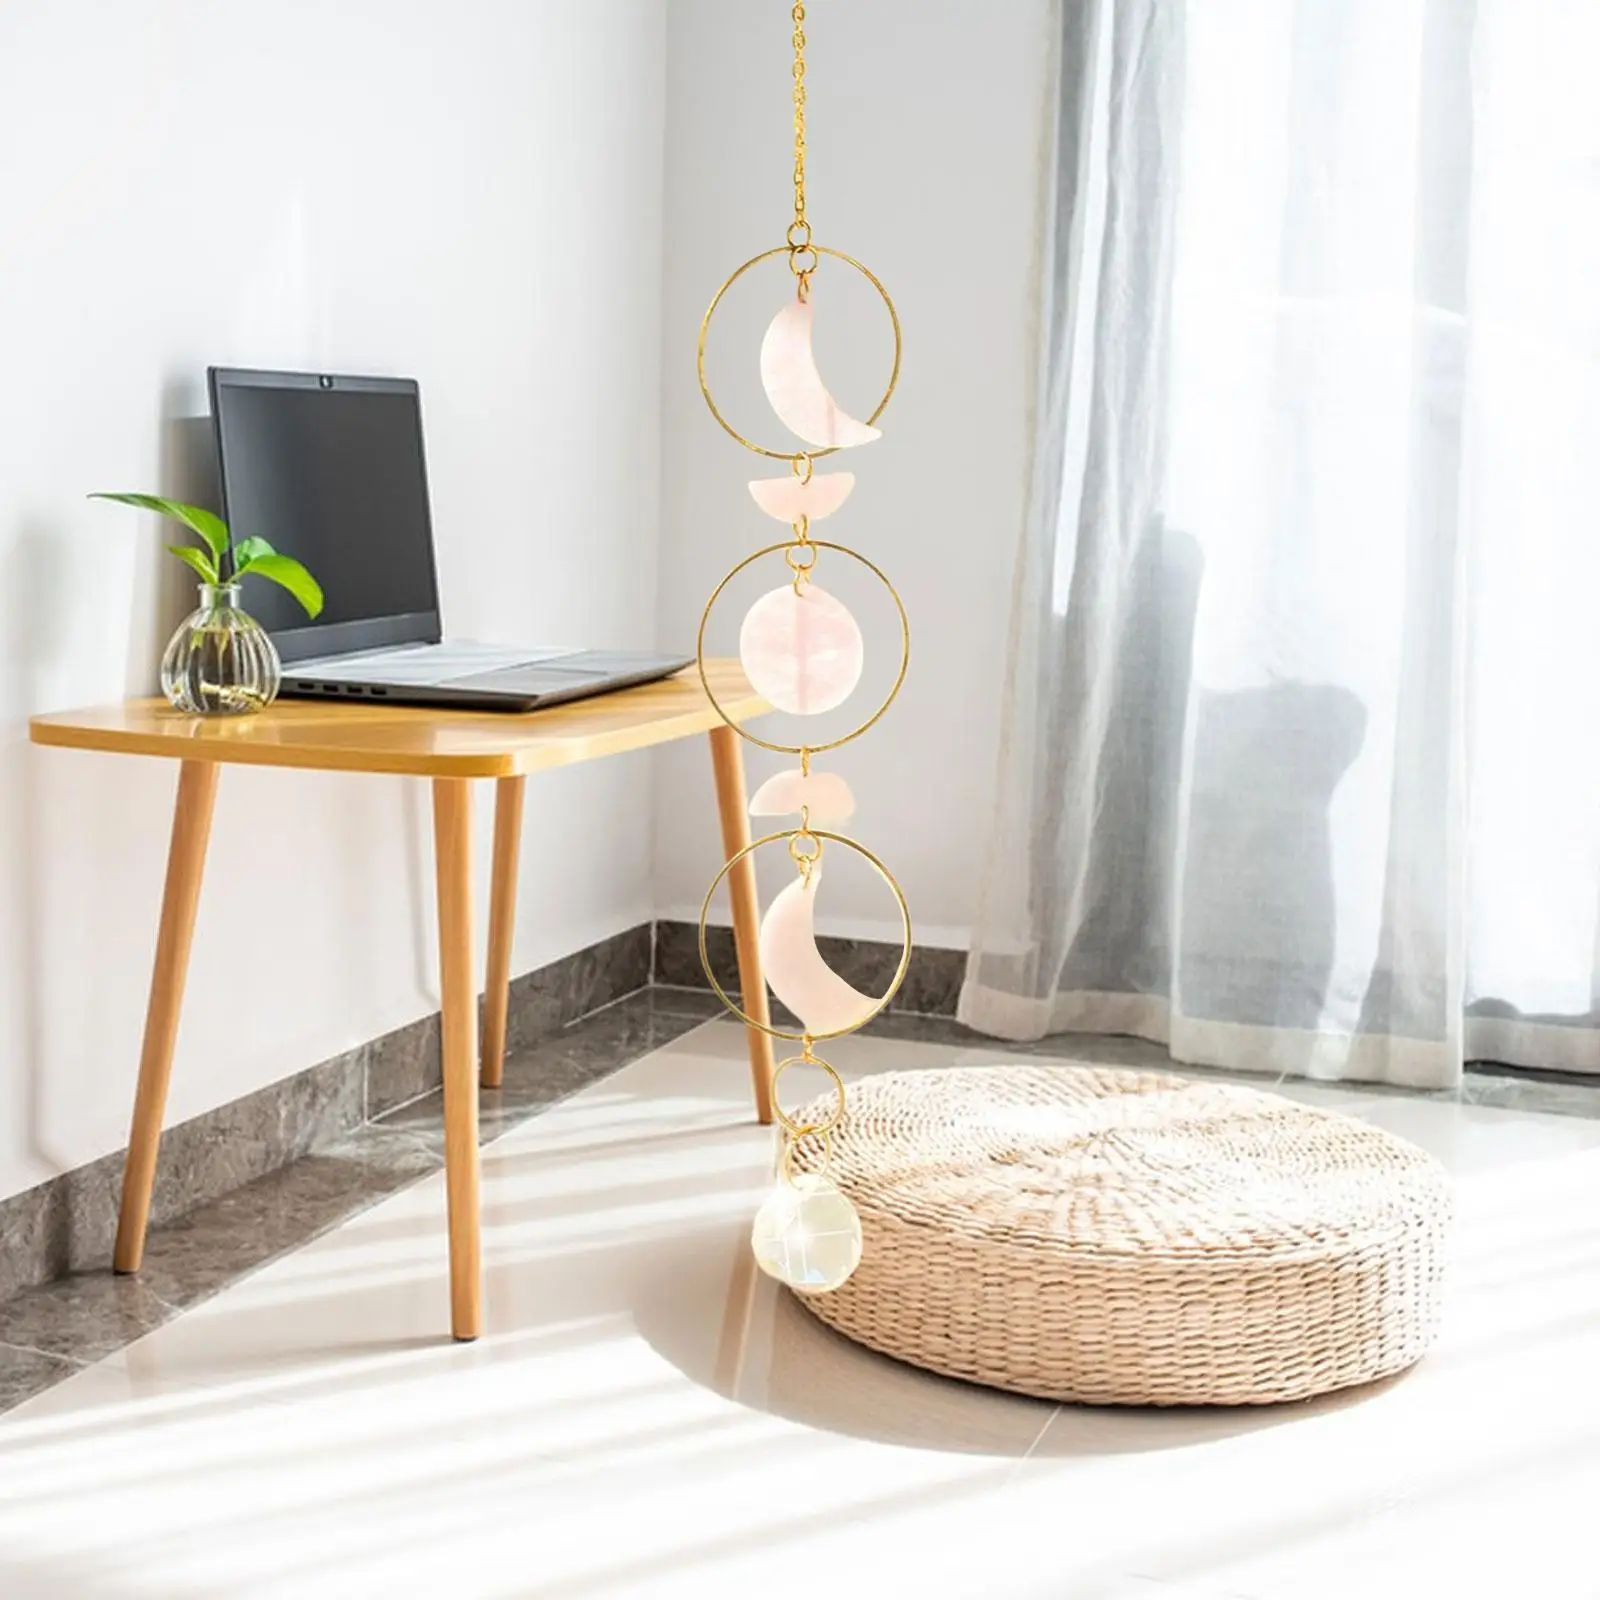 Hanging Pendant Rainbow Make Prisms Decor with Chain for Room Wedding Home